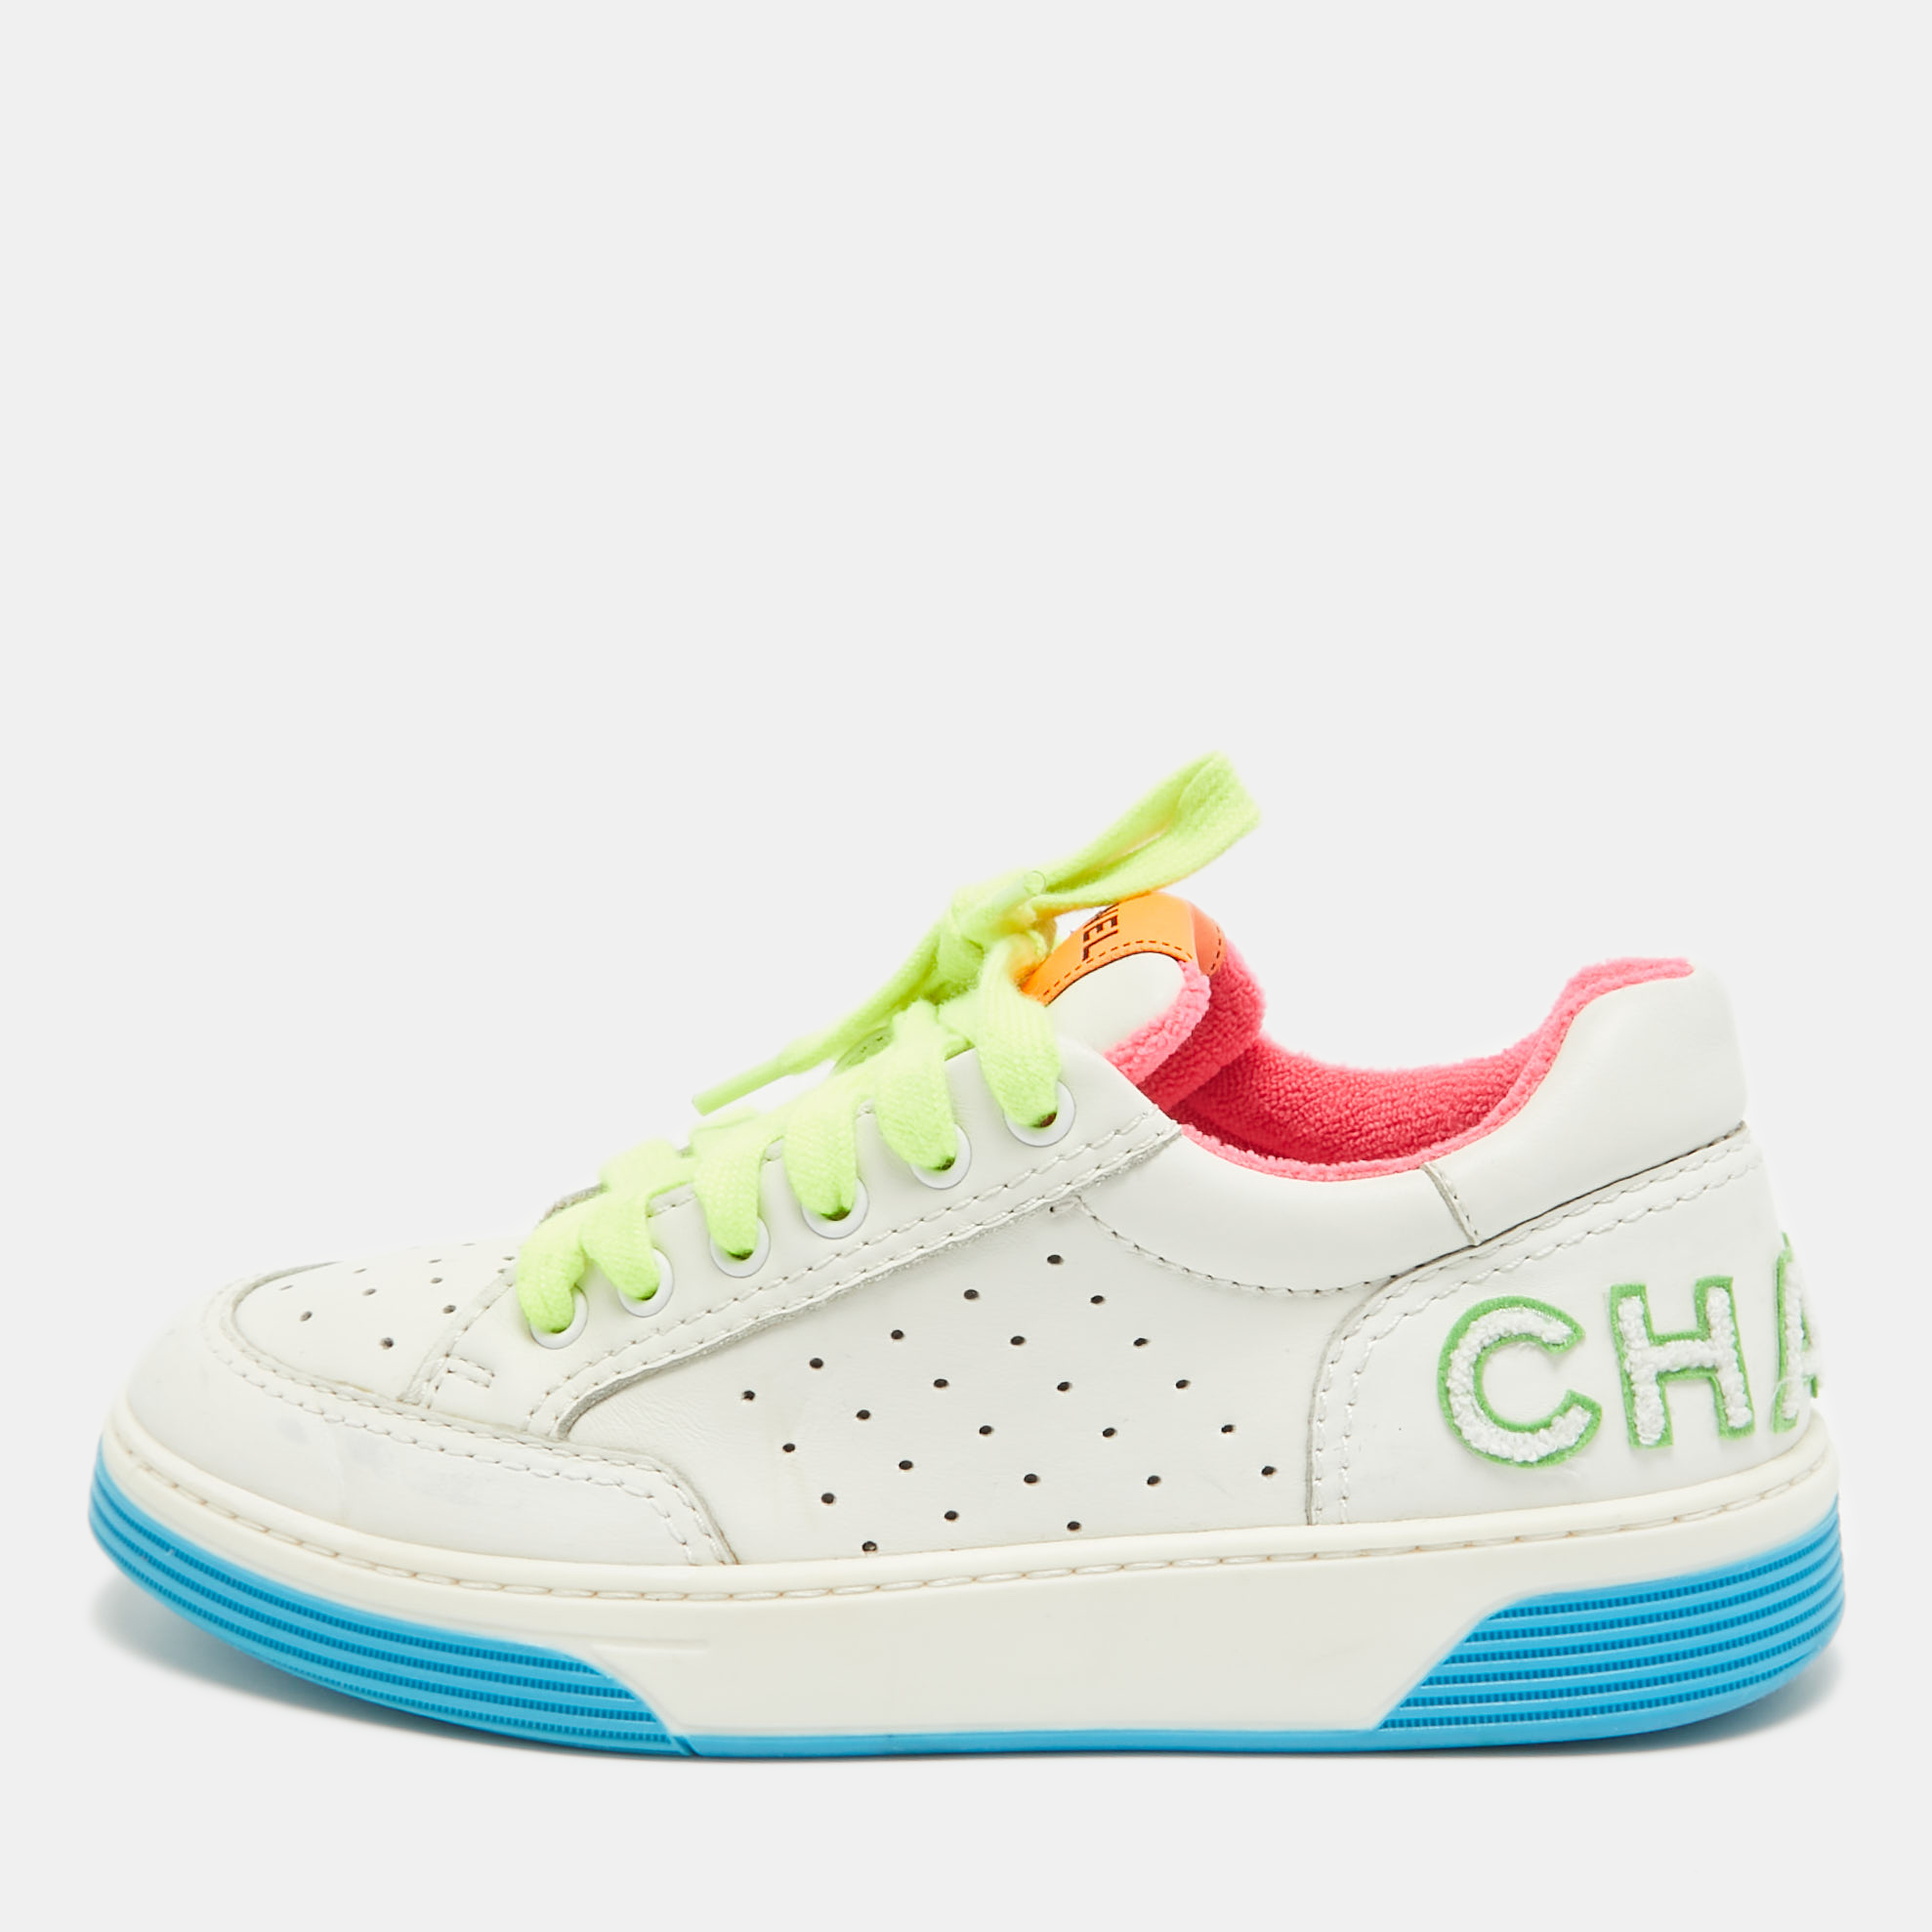 Chanel white/neon leather logo low top sneakers size 37